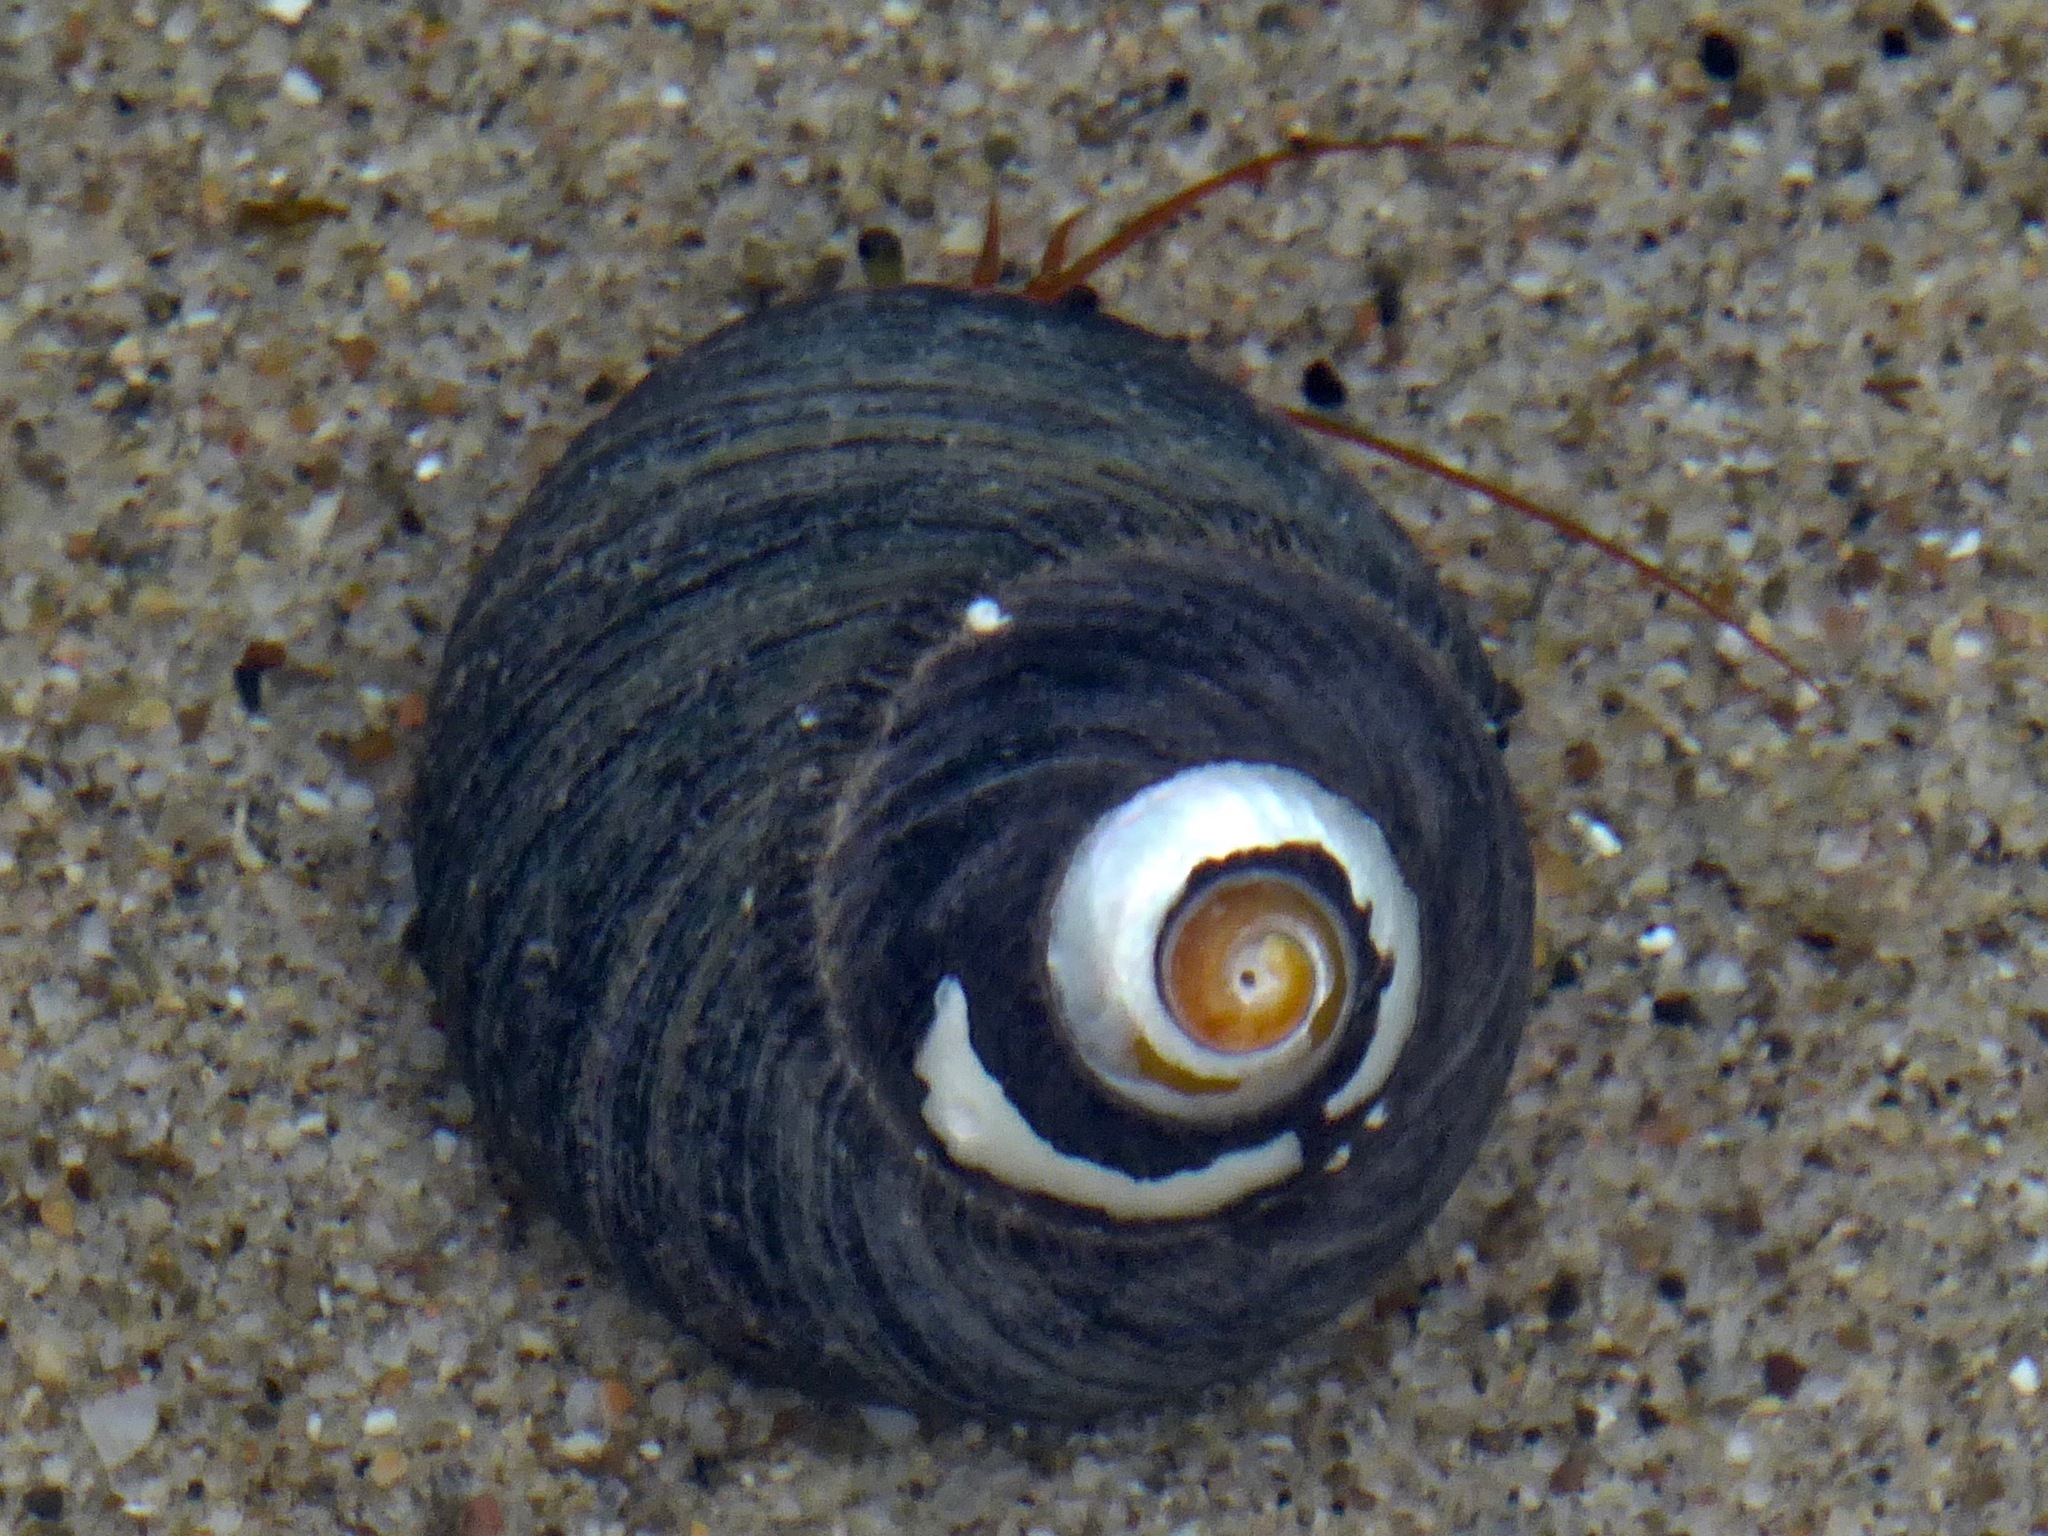 Image of Black Top Shell